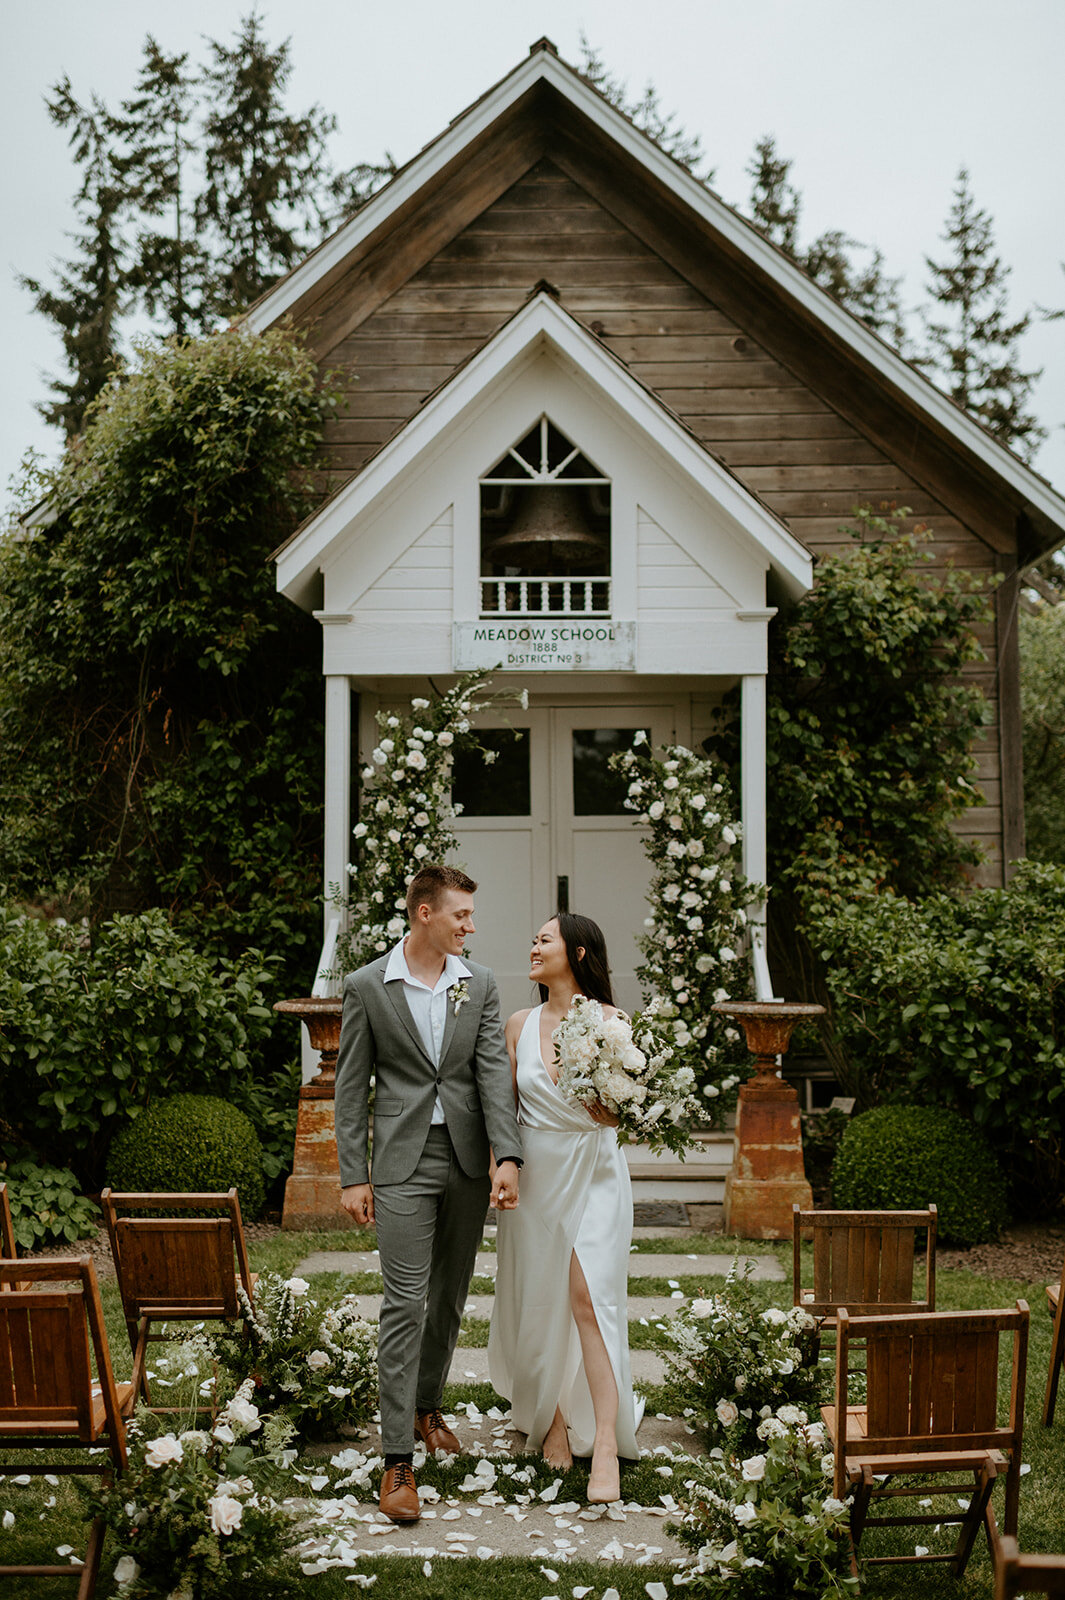  Intimate styled wedding in The Label RAIN wedding gown by a&amp;bé x anna bé bridal shop photographed by Emily Noelle Photography 